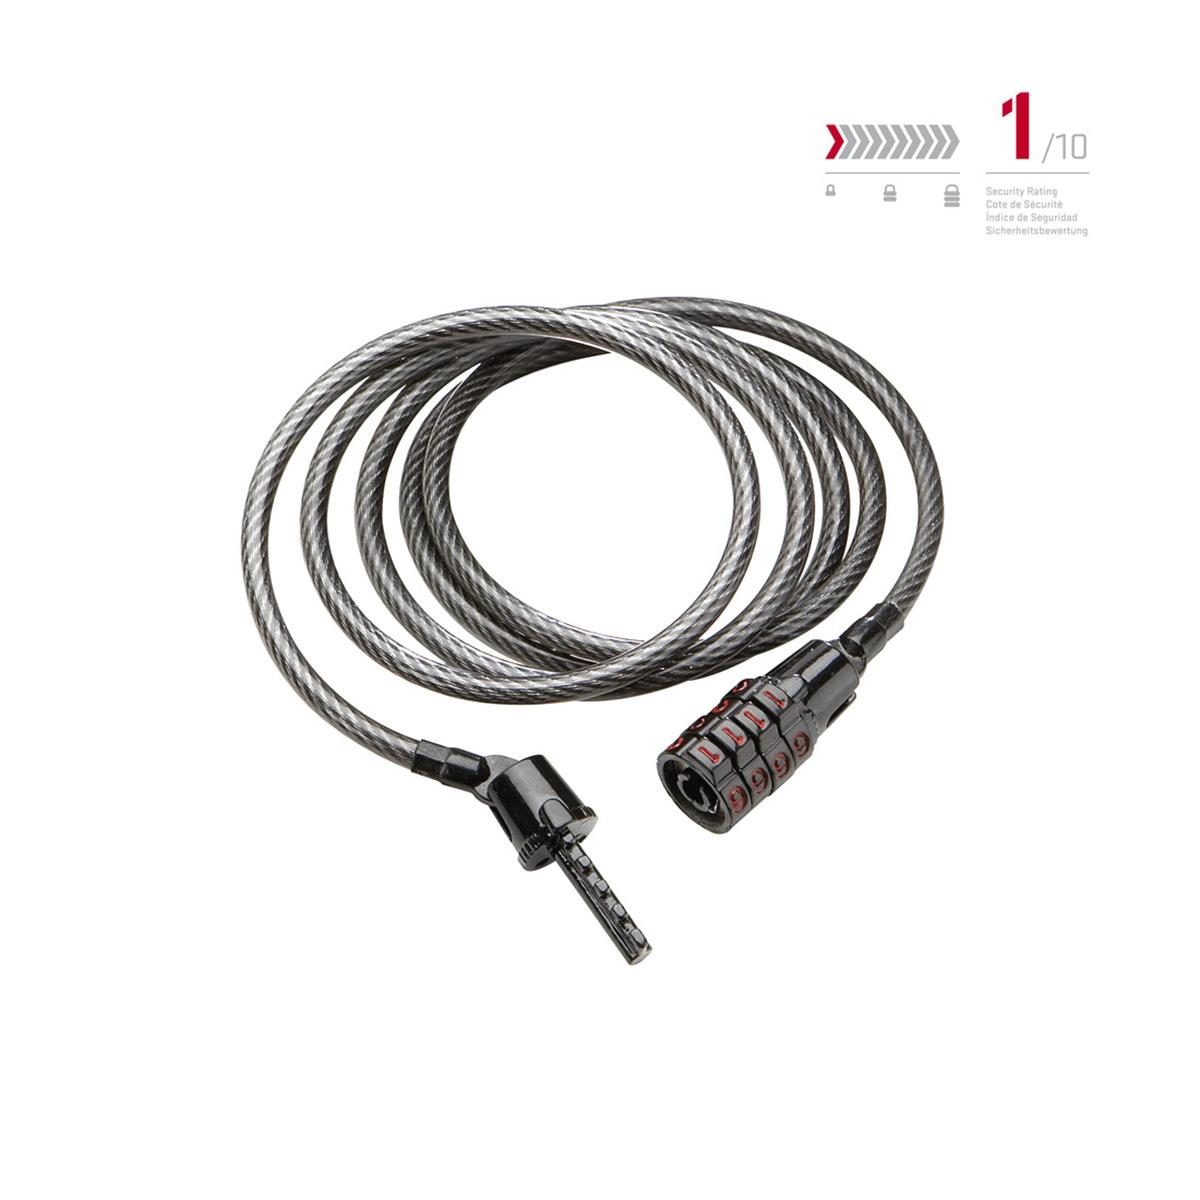 Kryptonite Combination Lock Keeper 512 Combo Cable, 120 cm